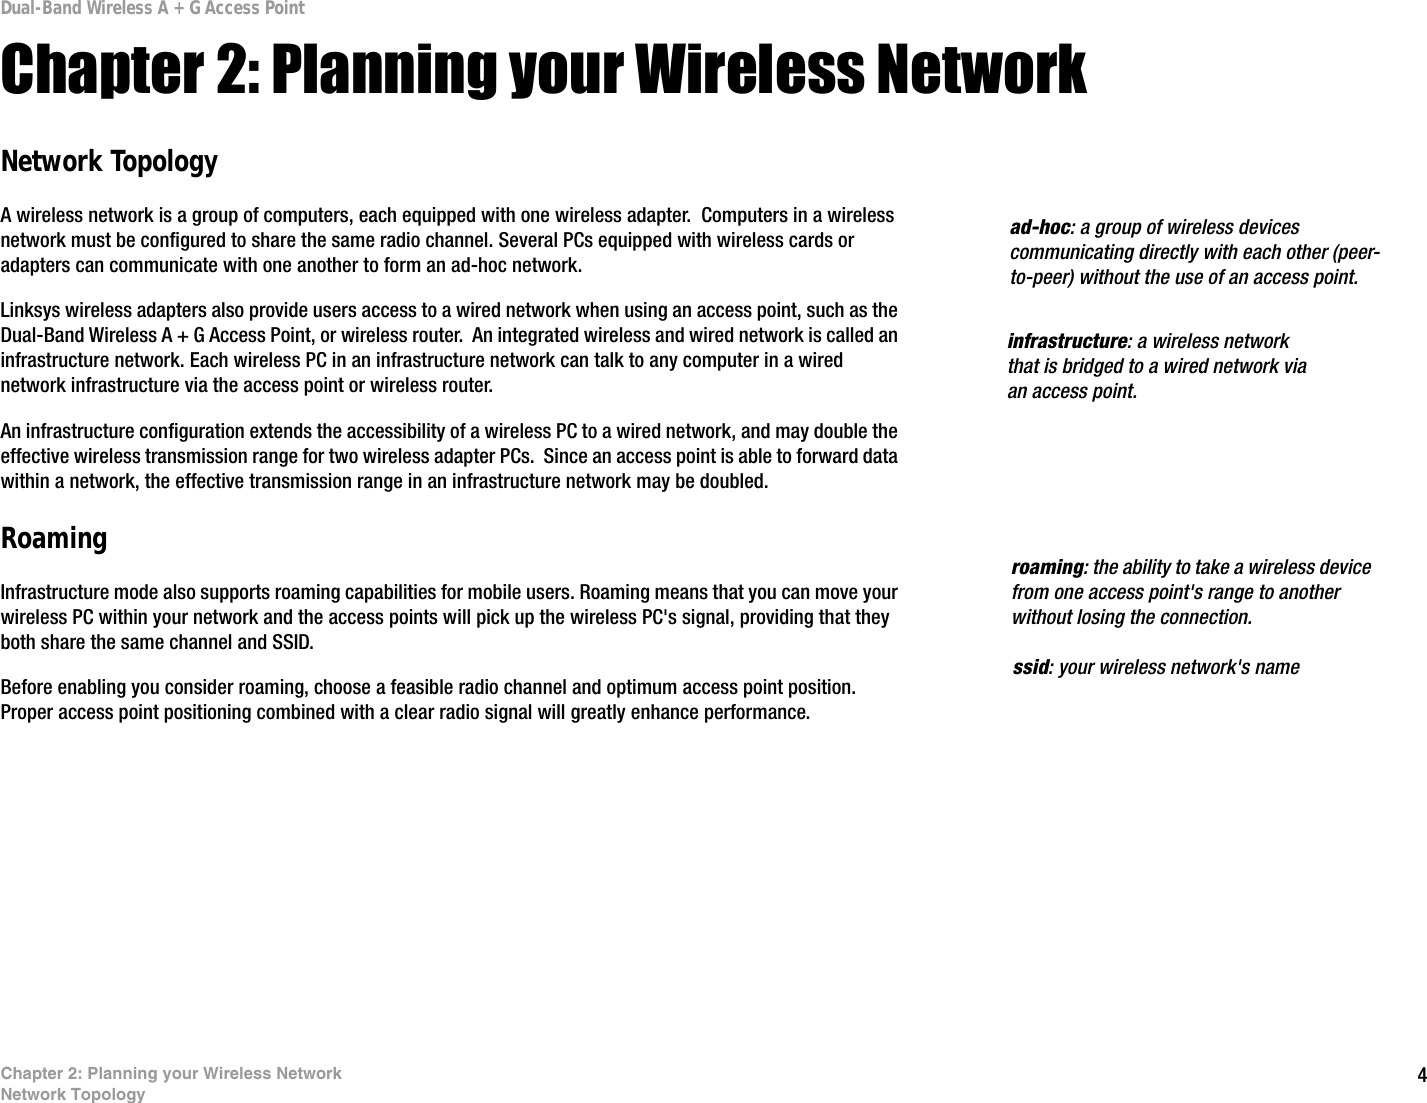 4Chapter 2: Planning your Wireless NetworkNetwork TopologyDual-Band Wireless A + G Access PointChapter 2: Planning your Wireless NetworkNetwork TopologyA wireless network is a group of computers, each equipped with one wireless adapter.  Computers in a wireless network must be configured to share the same radio channel. Several PCs equipped with wireless cards or adapters can communicate with one another to form an ad-hoc network.Linksys wireless adapters also provide users access to a wired network when using an access point, such as the Dual-Band Wireless A + G Access Point, or wireless router.  An integrated wireless and wired network is called an infrastructure network. Each wireless PC in an infrastructure network can talk to any computer in a wired network infrastructure via the access point or wireless router.An infrastructure configuration extends the accessibility of a wireless PC to a wired network, and may double the effective wireless transmission range for two wireless adapter PCs.  Since an access point is able to forward data within a network, the effective transmission range in an infrastructure network may be doubled.RoamingInfrastructure mode also supports roaming capabilities for mobile users. Roaming means that you can move your wireless PC within your network and the access points will pick up the wireless PC&apos;s signal, providing that they both share the same channel and SSID.Before enabling you consider roaming, choose a feasible radio channel and optimum access point position. Proper access point positioning combined with a clear radio signal will greatly enhance performance. infrastructure: a wireless network that is bridged to a wired network via an access point.ad-hoc: a group of wireless devices communicating directly with each other (peer-to-peer) without the use of an access point.roaming: the ability to take a wireless device from one access point&apos;s range to another without losing the connection.ssid: your wireless network&apos;s name